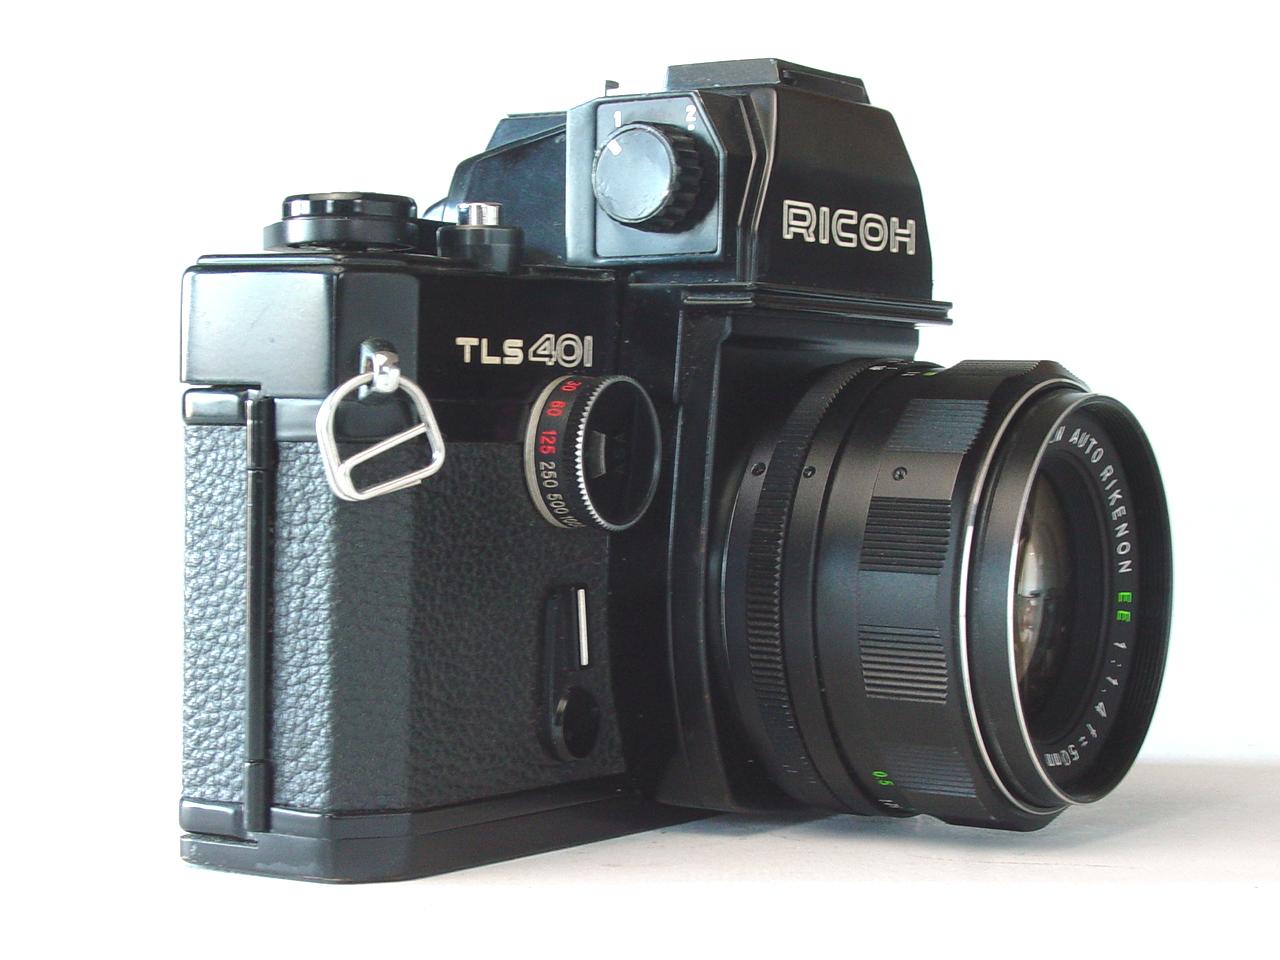 RICOH TLS 401 - Viewer Switch - Click to Enlarge